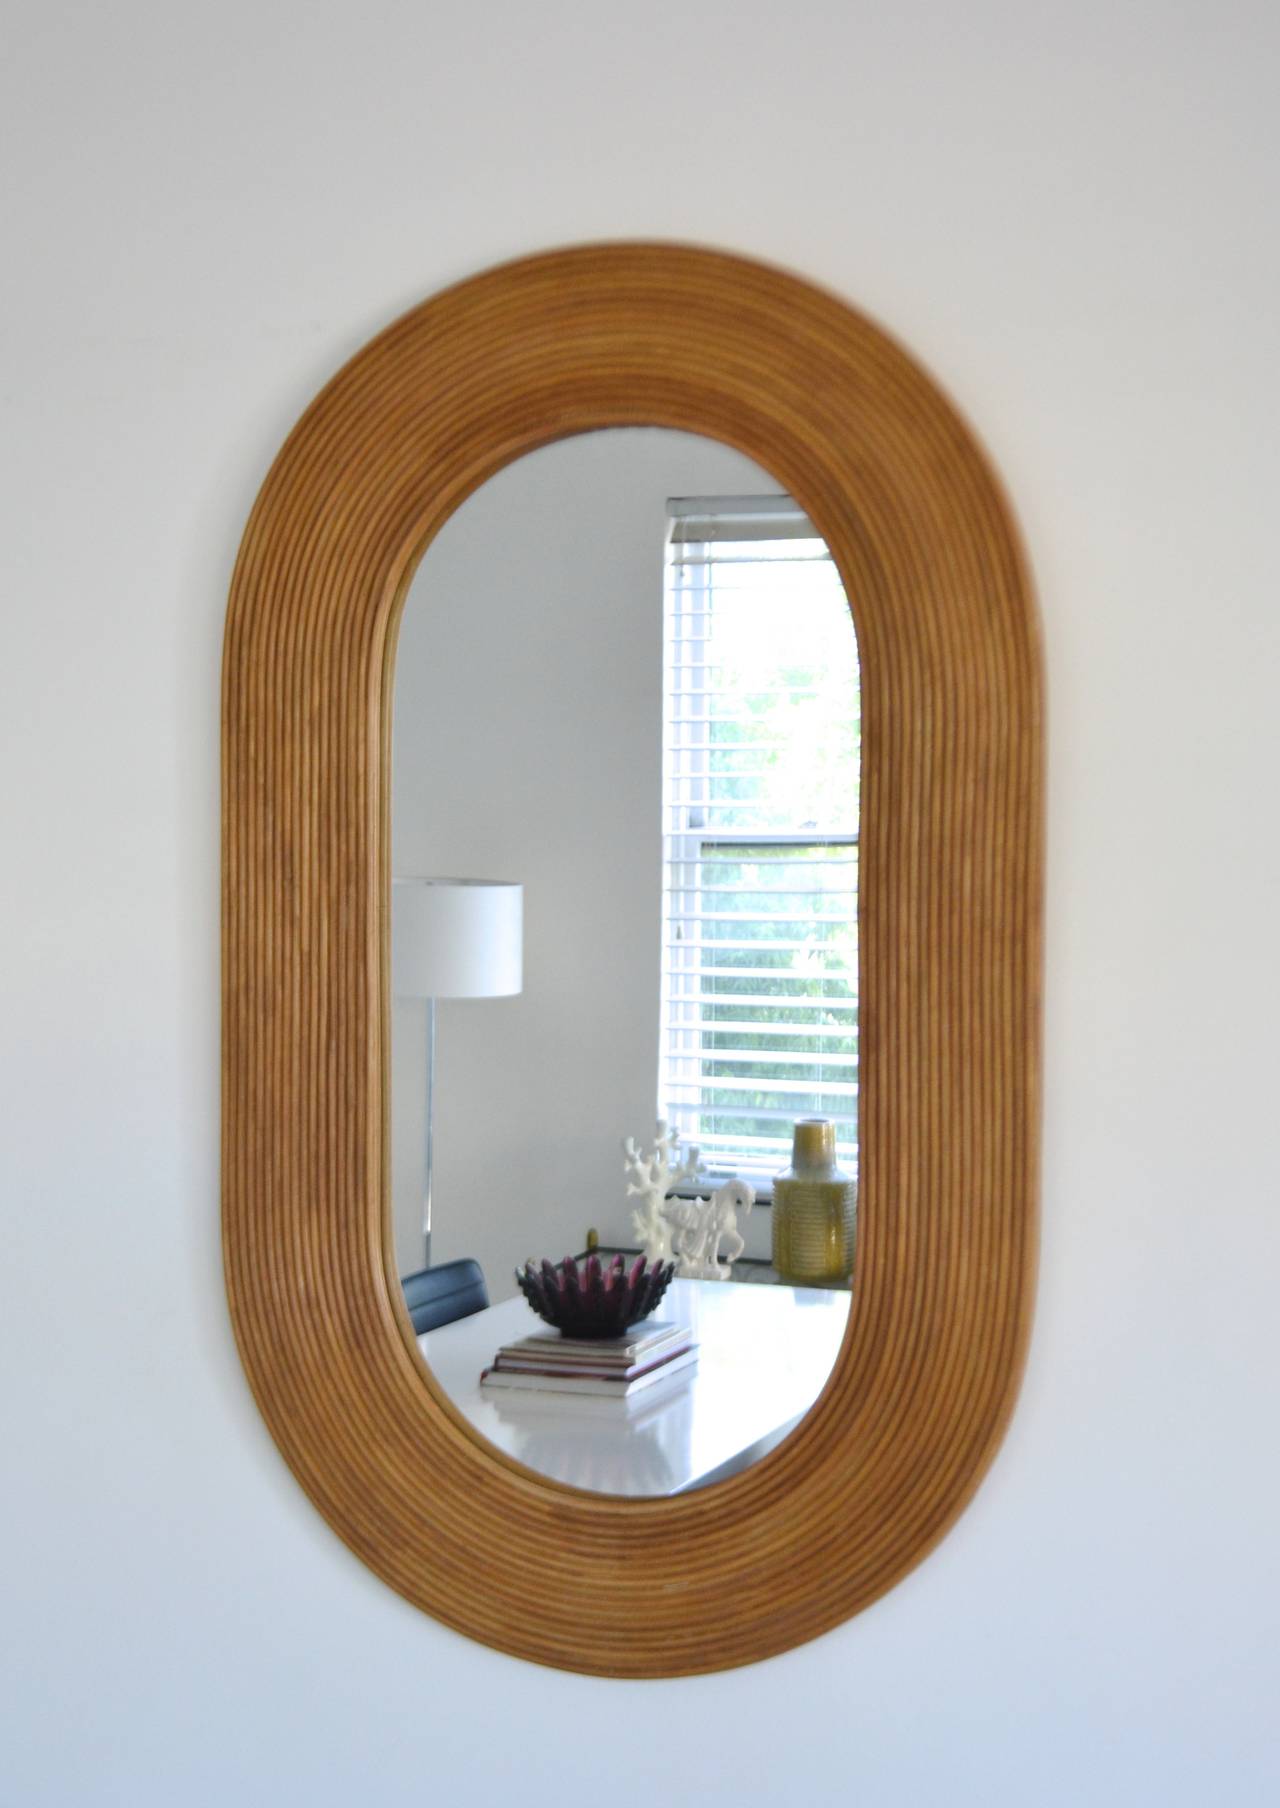 Impressive Mid Century Modern custom oval faux bamboo wall mirror, c. 1970s. This highly decorative carved wooden mirror is designed to capture the glamorous essence of reeded bamboo. 

Measurements: 
Overall: 45